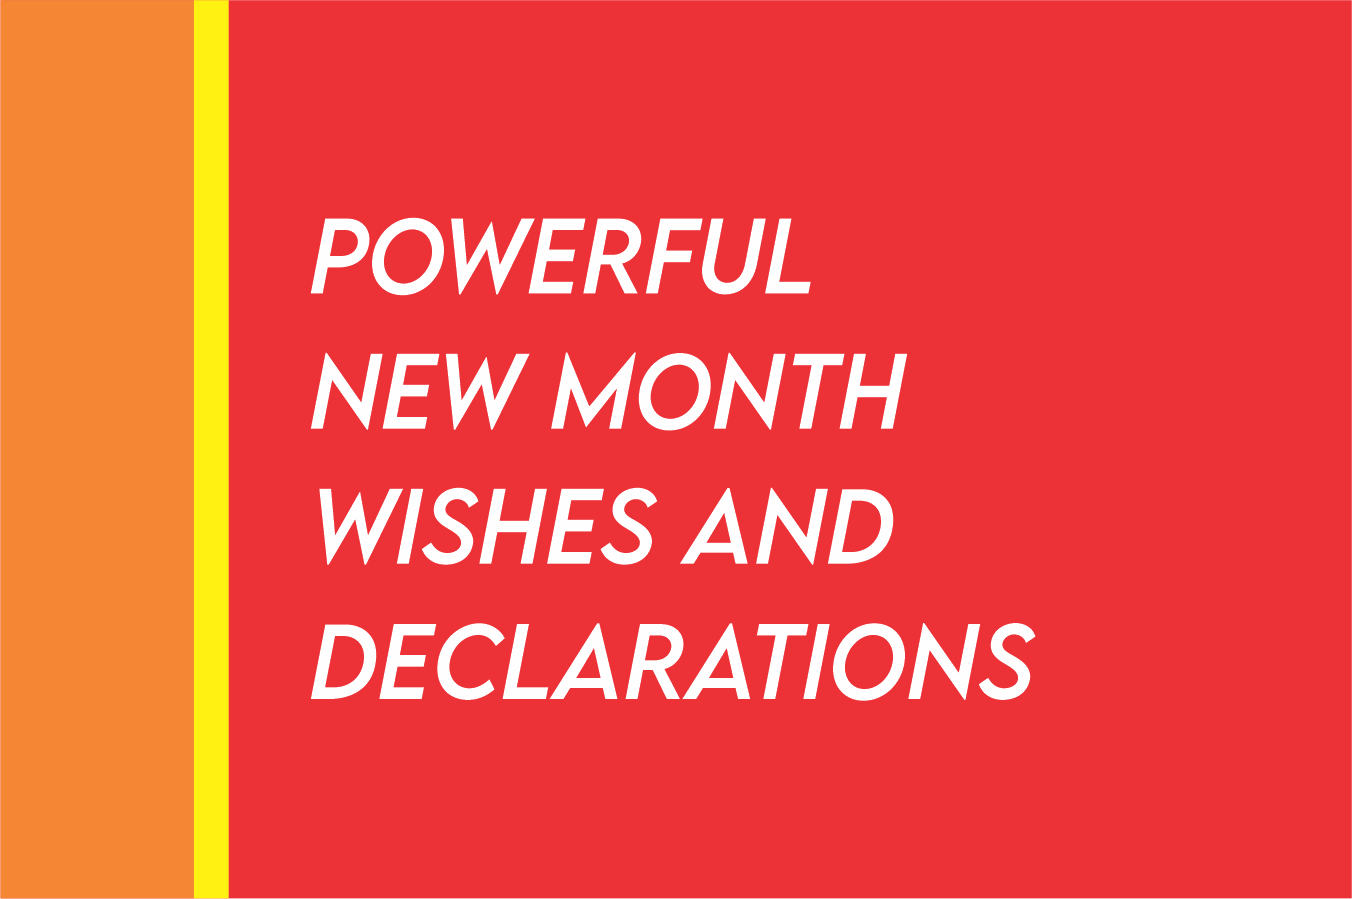 Biblical New Month Wishes